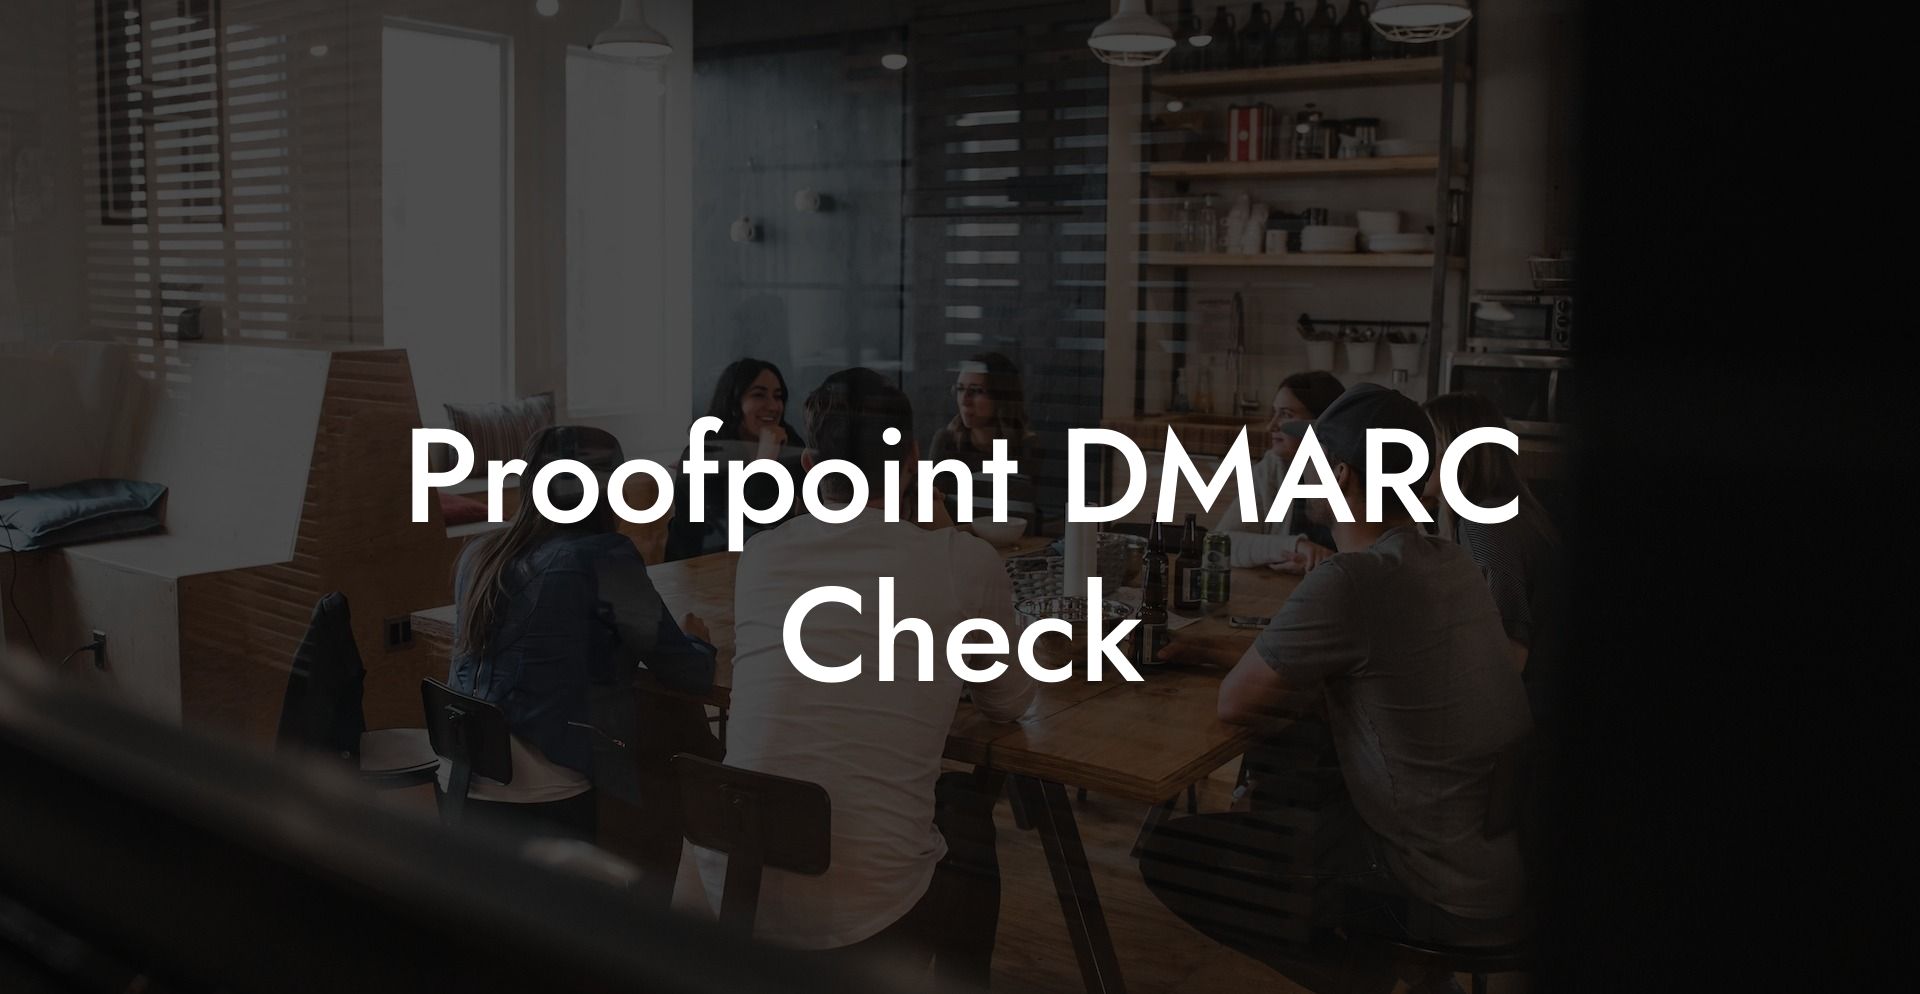 Proofpoint DMARC Check